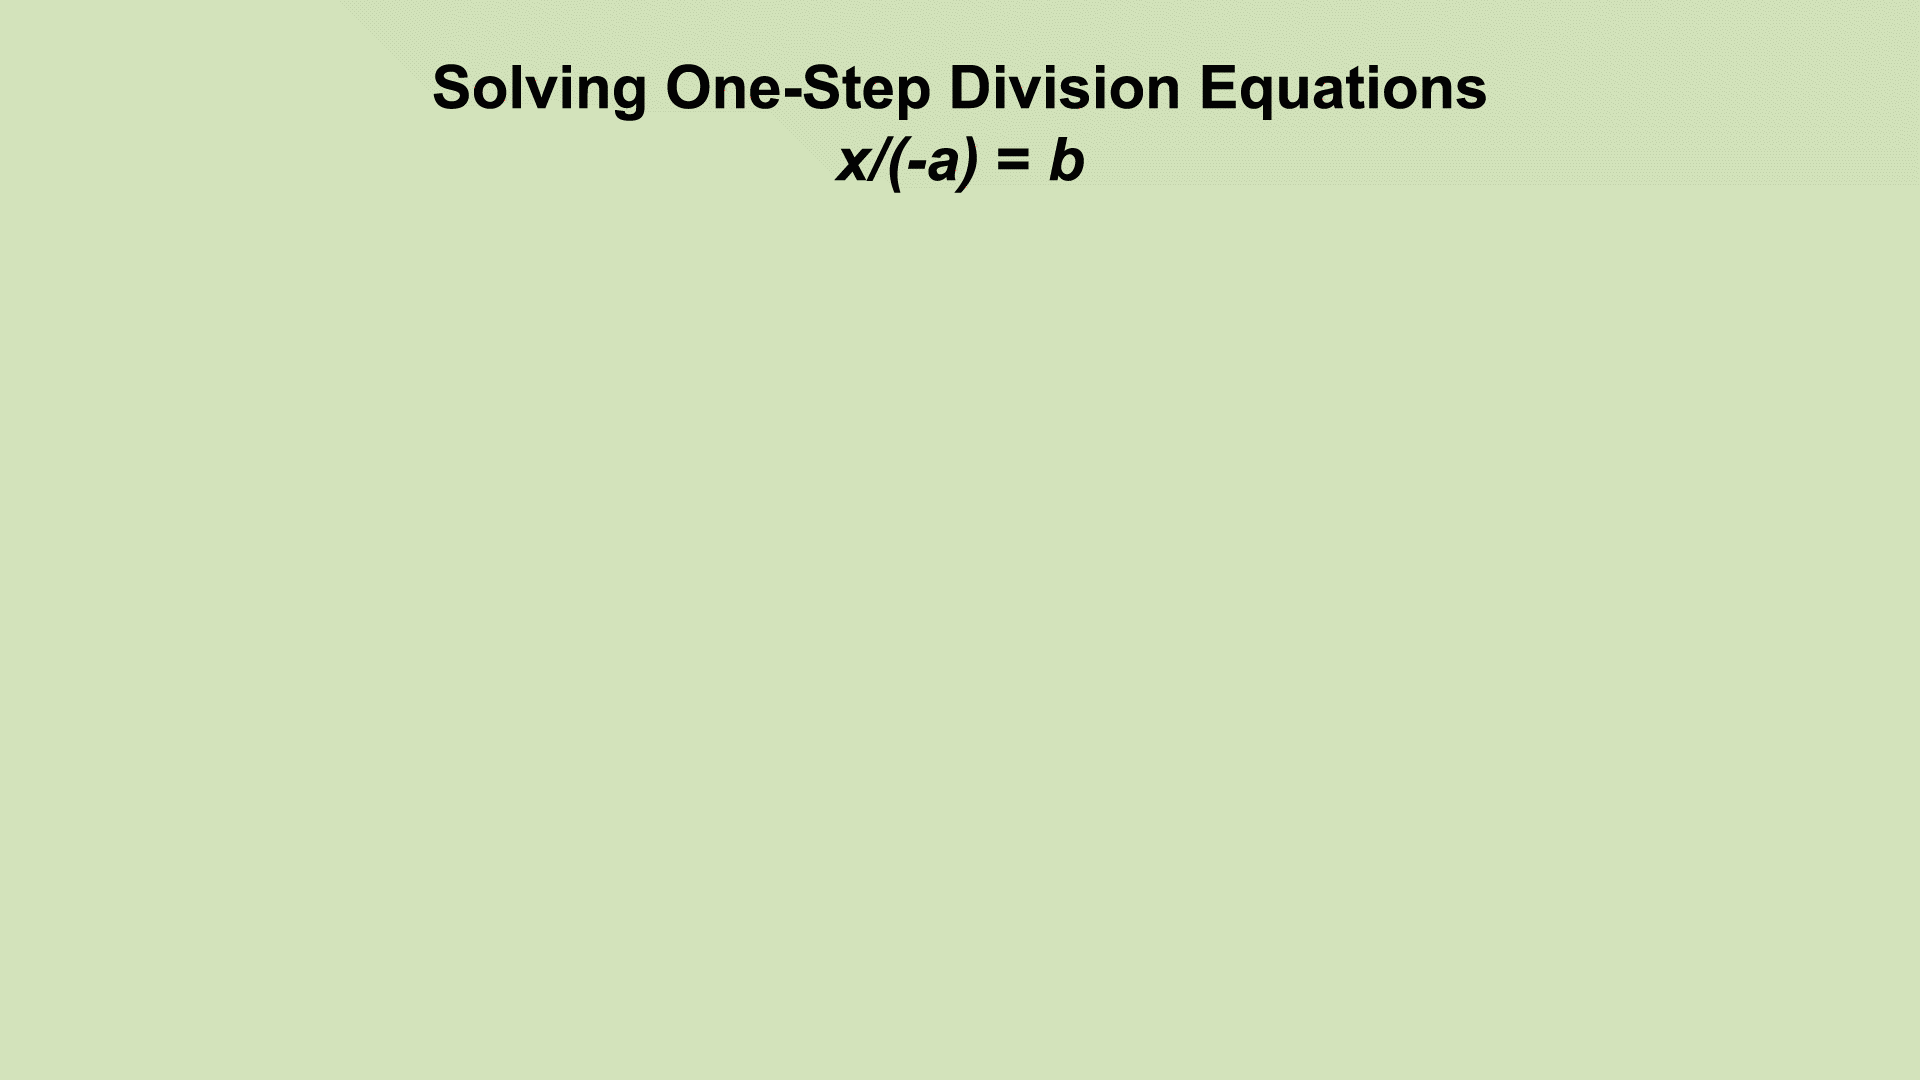 In this example the one-step equation shows division by a negative number.